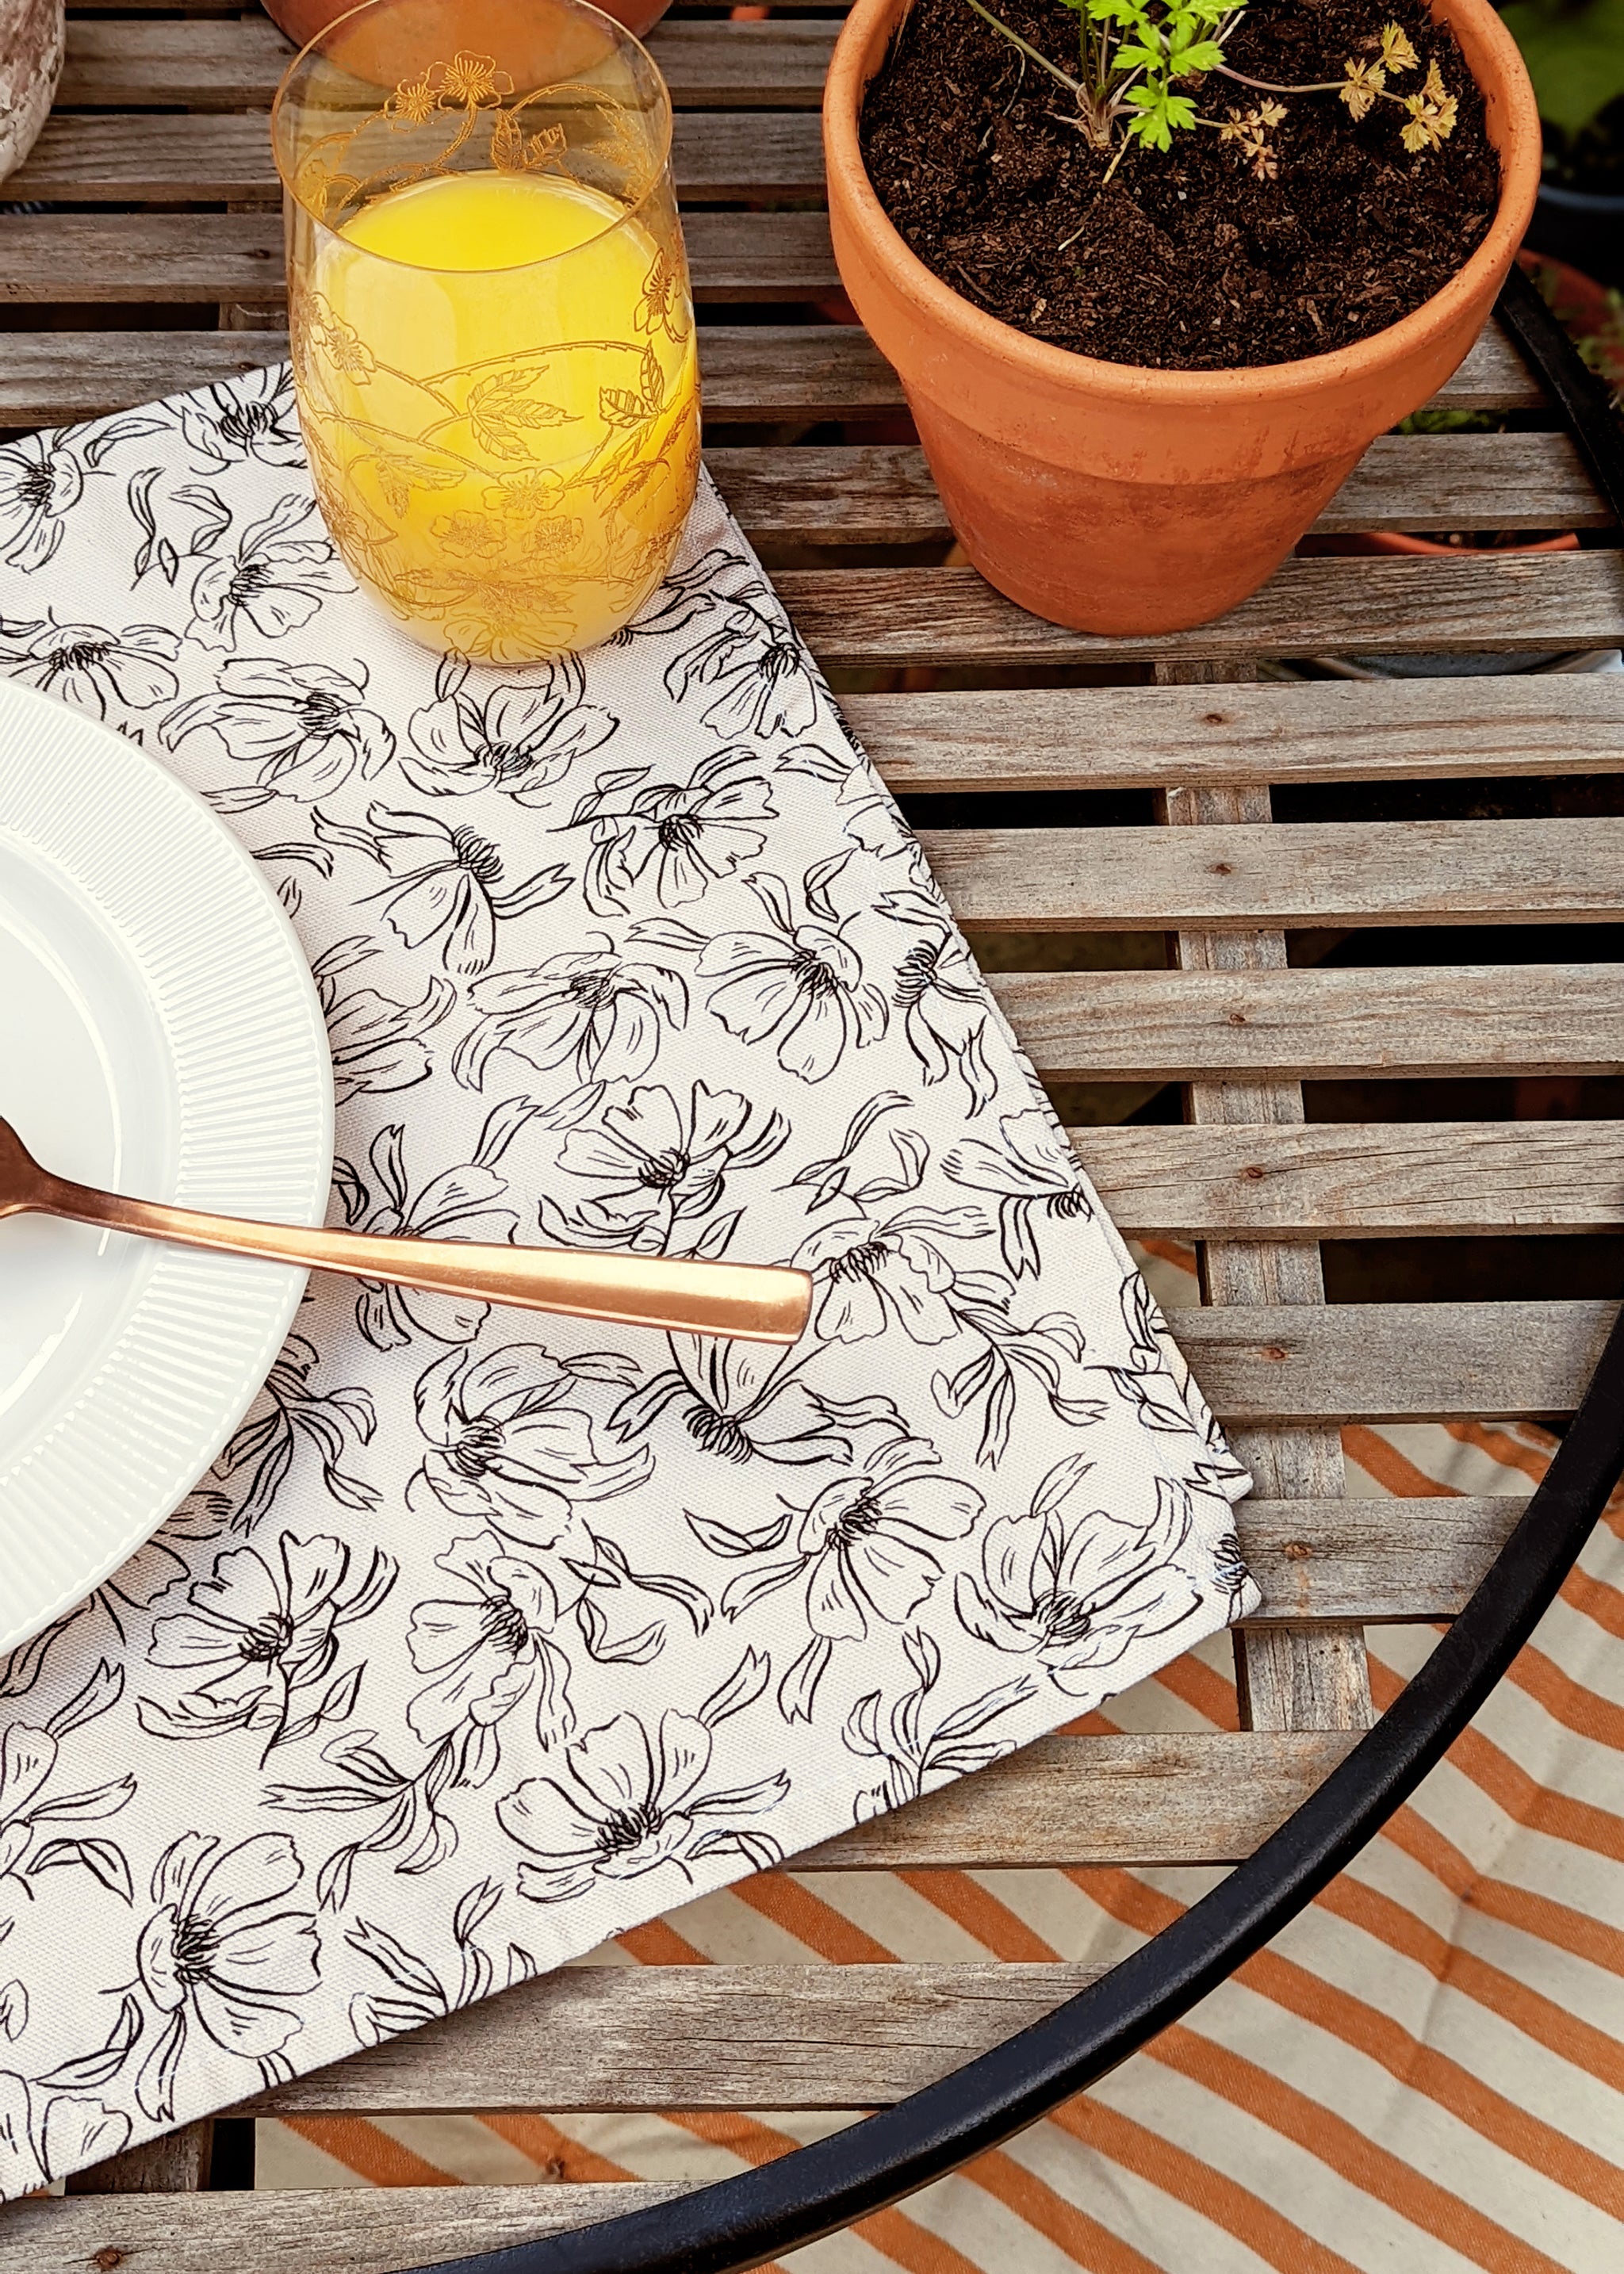 a black and cream, linework-style floral patterned tea towel spread out on a wooden garden table, used as a place setting / place mat